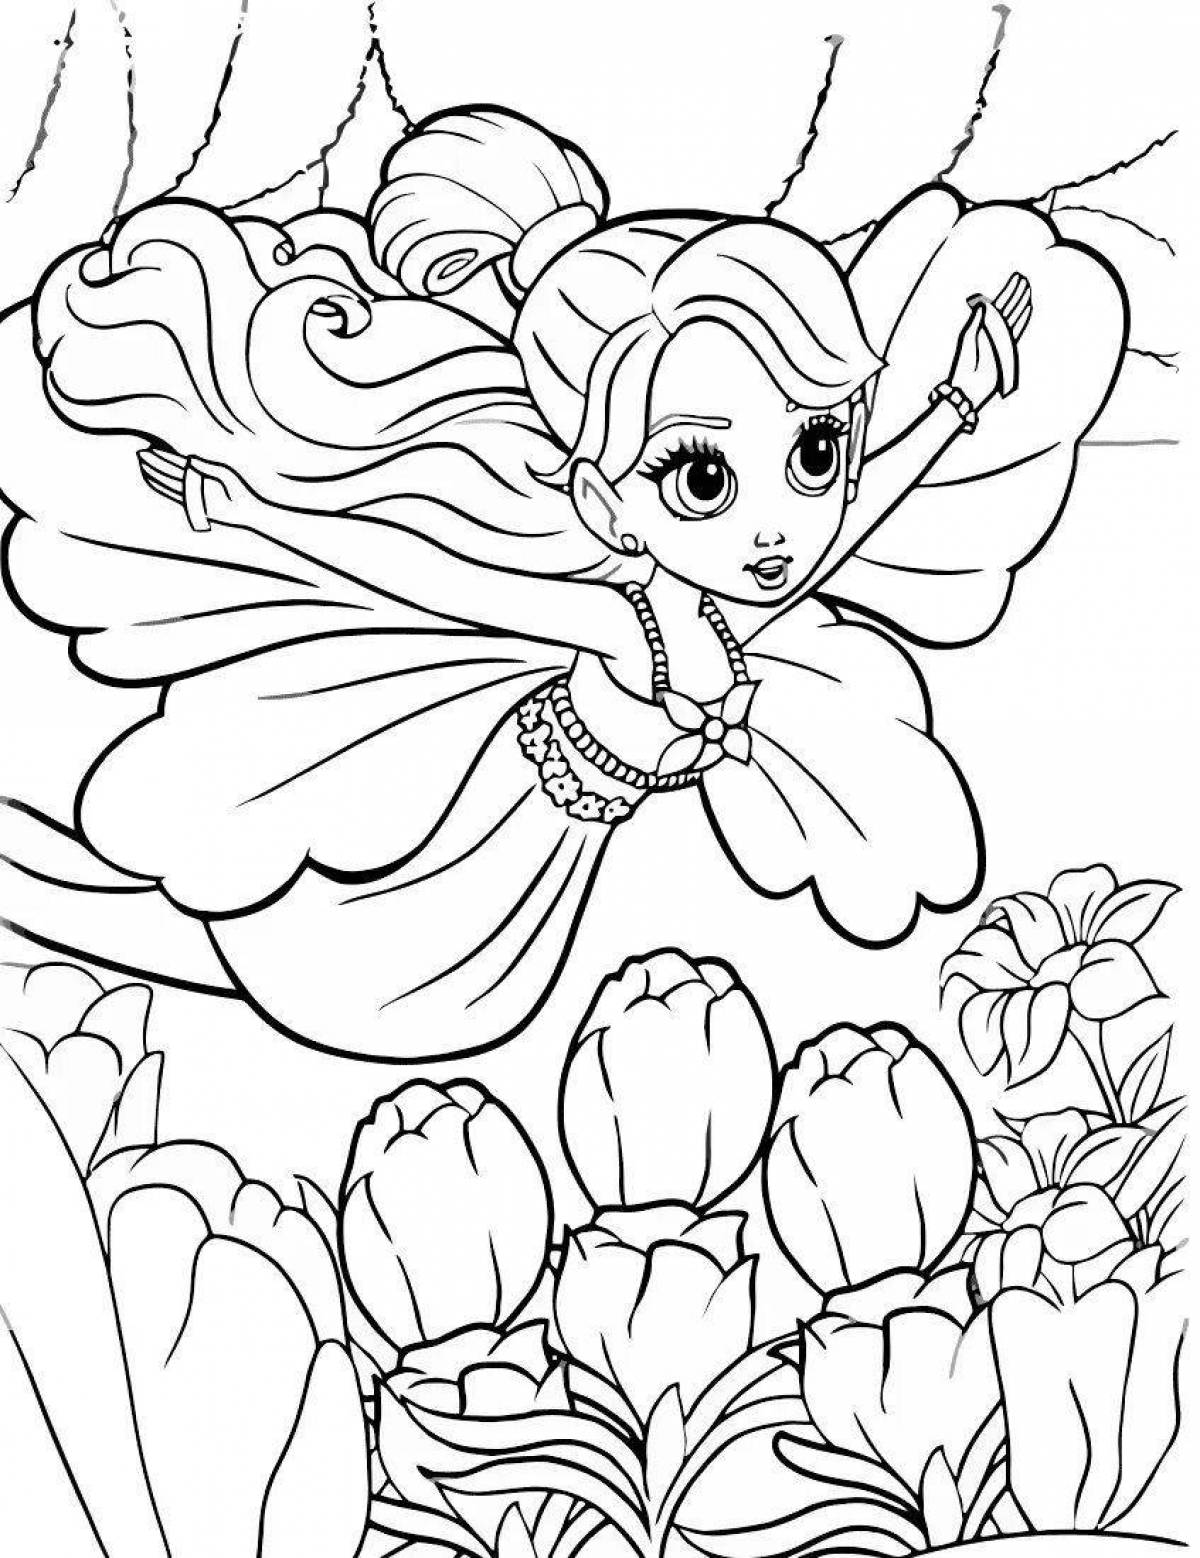 Fun coloring for girls 6 years old